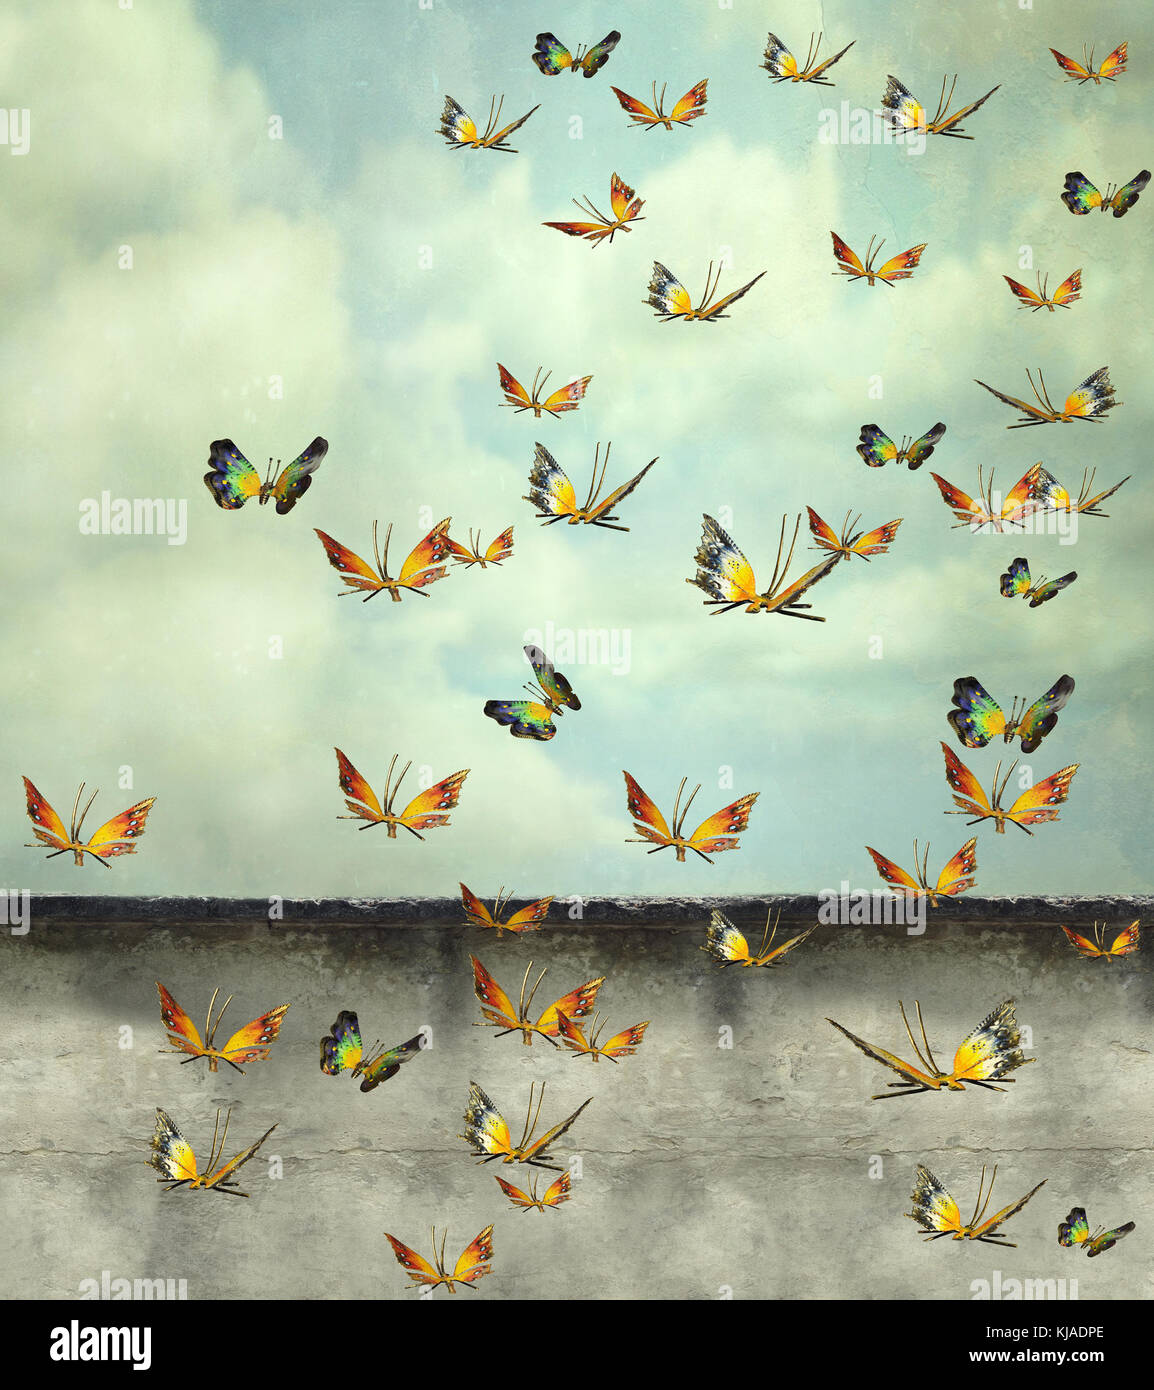 Many colorful butterflies flying into the sky with a peeling wall, illustrative photo and artistic Stock Photo